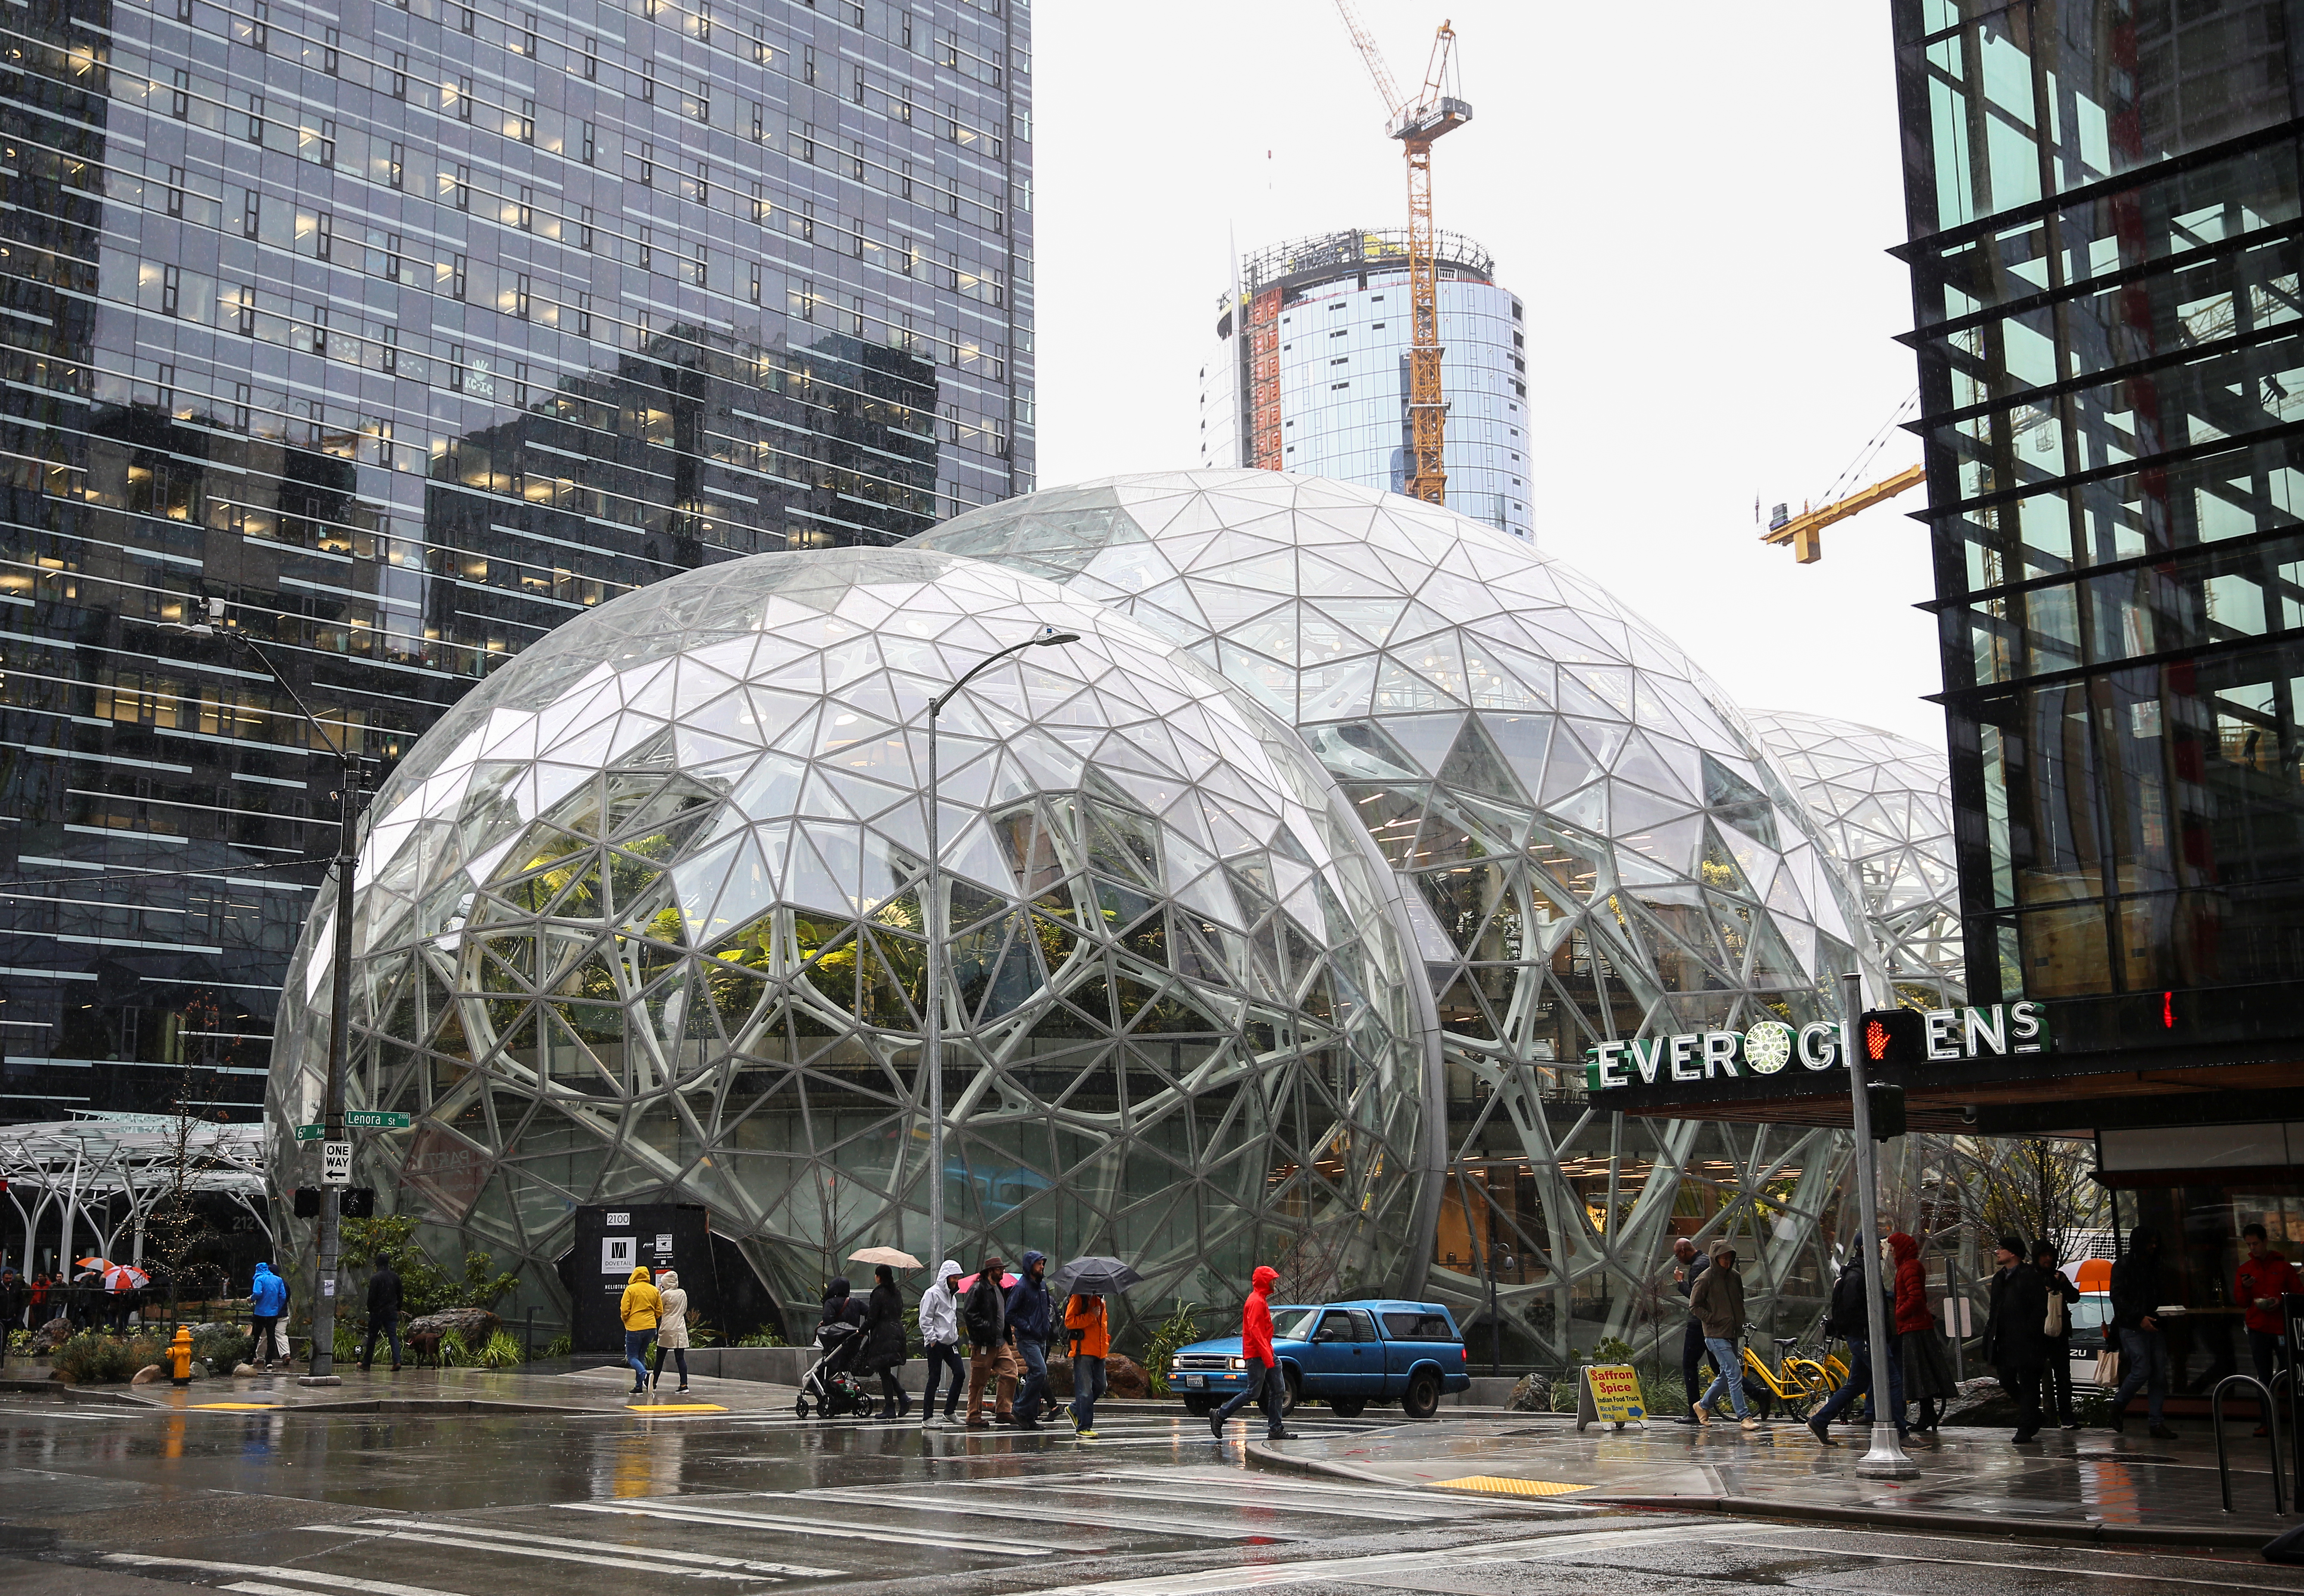 This Is What Amazon Is Really Looking For in Its New 'HQ2' Headquarters